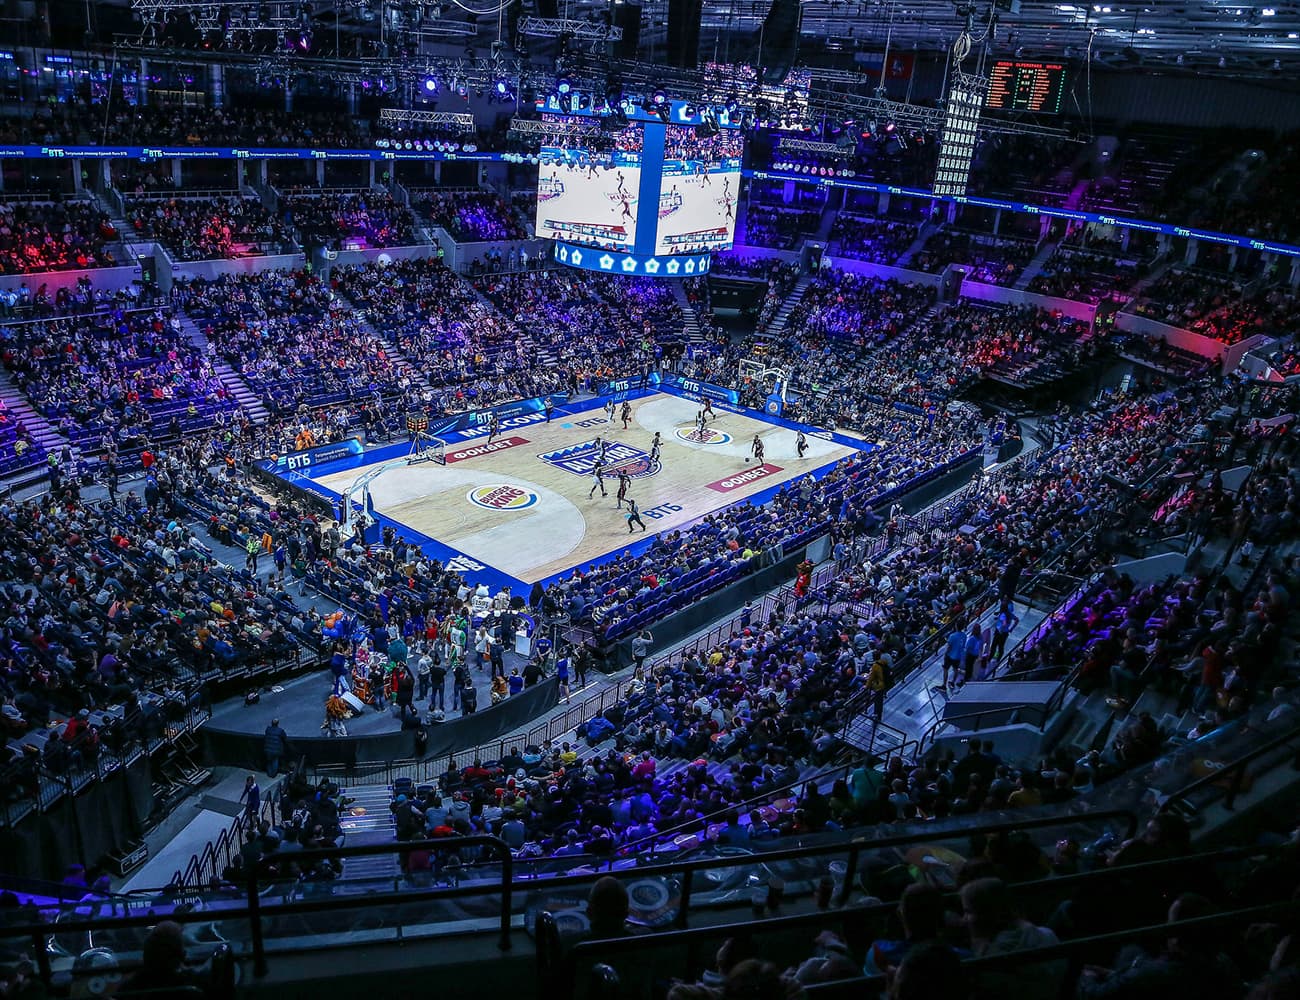 The highest attendance at Russian arenas in League history